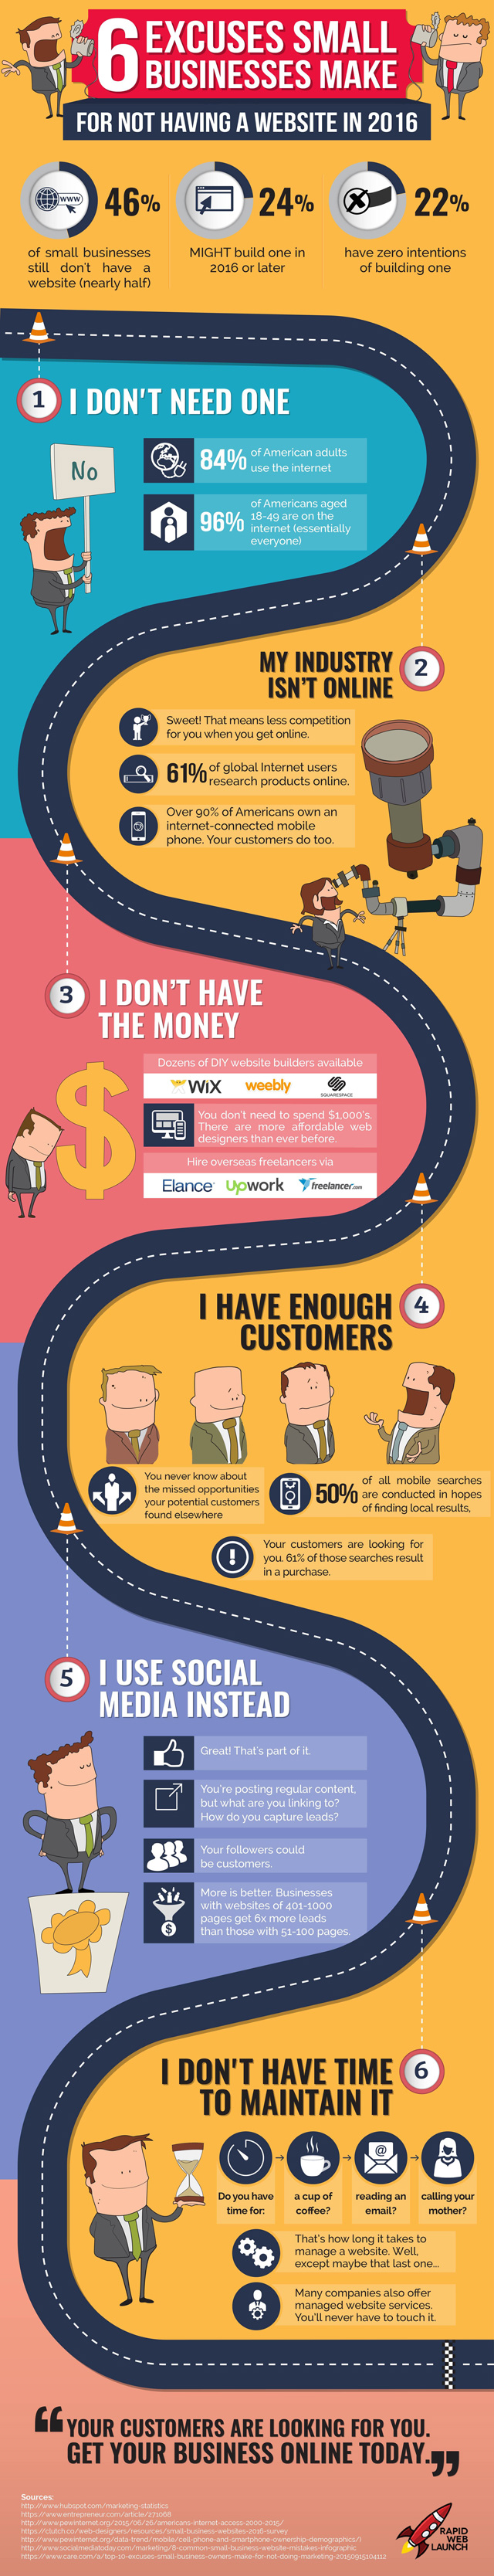 Infographic containing excuses why small businesses don't have a website in 2016.